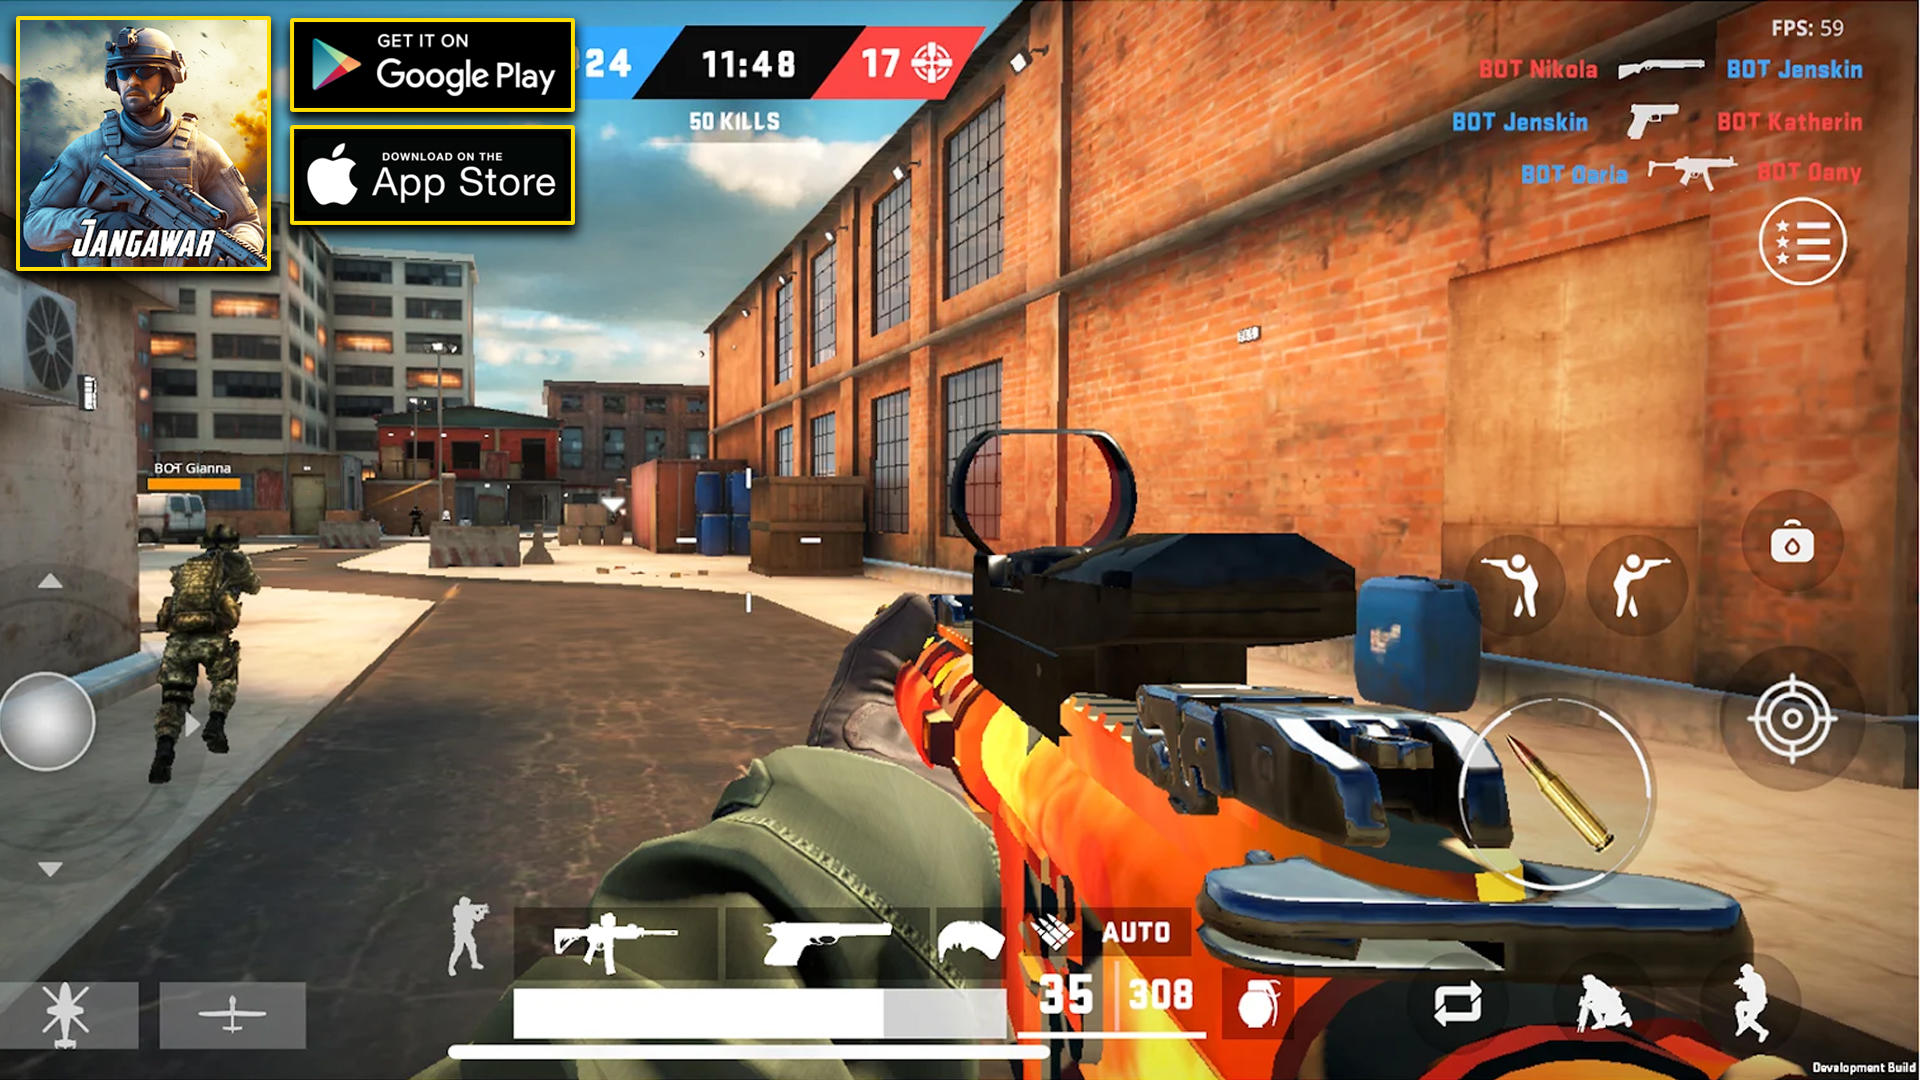 Download and Play Indus Battle Royale Mobile on PC & Mac (Emulator)